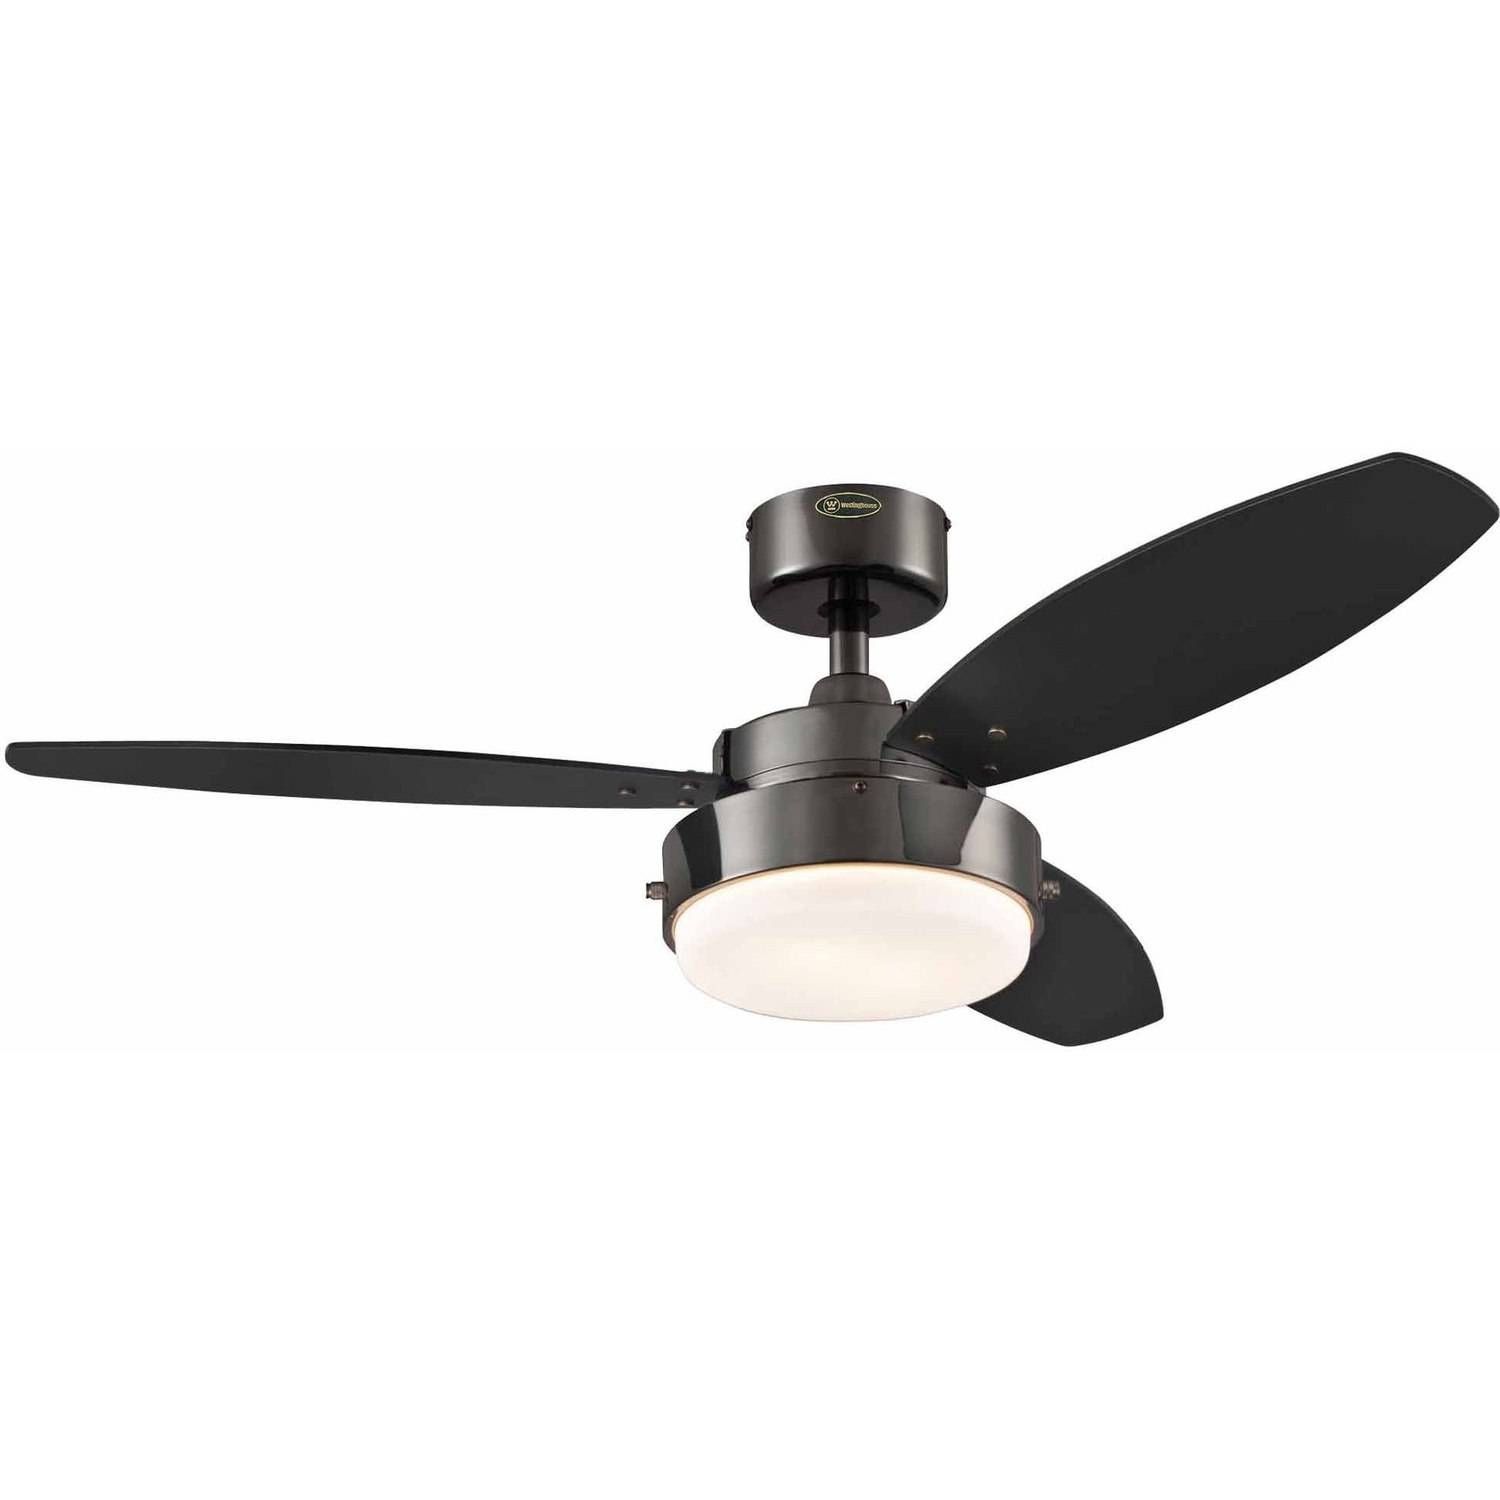 Ceiling Fan: Outstanding Black Outdoor Ceiling Fans With Lights Pertaining To Outdoor Ceiling Fan Lights With Remote Control (View 8 of 15)